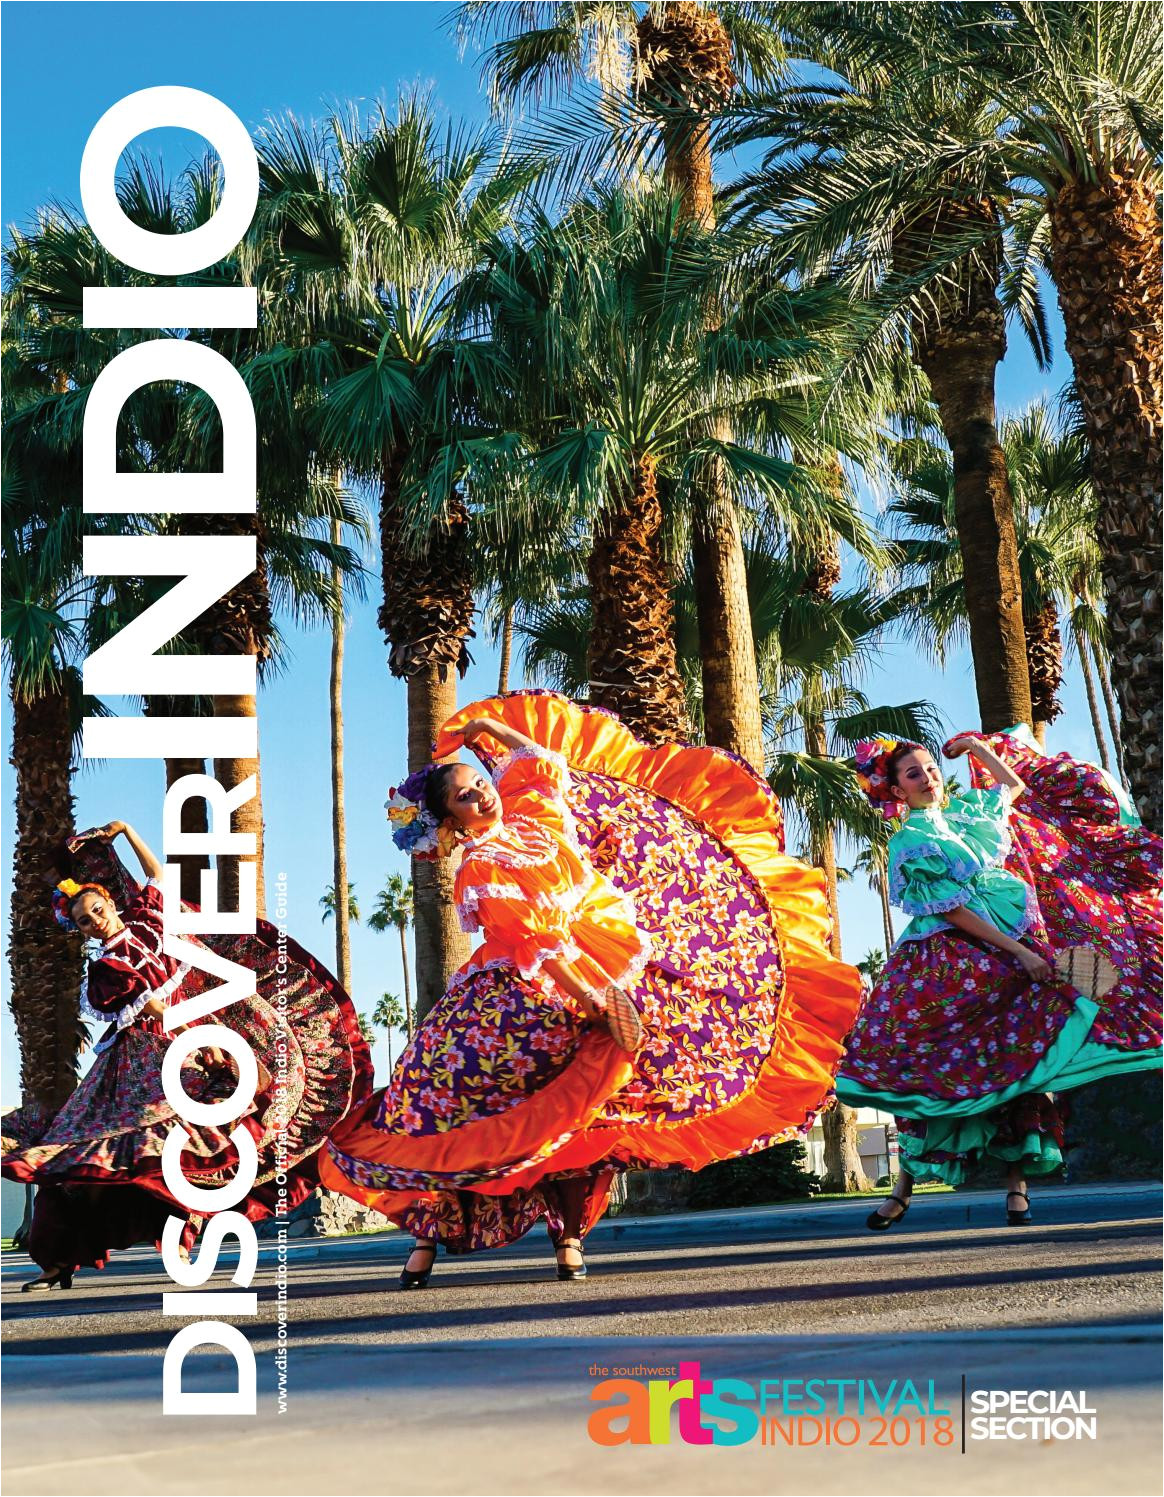 discover indio annual guide by greater coachella valley chamber of commerce issuu